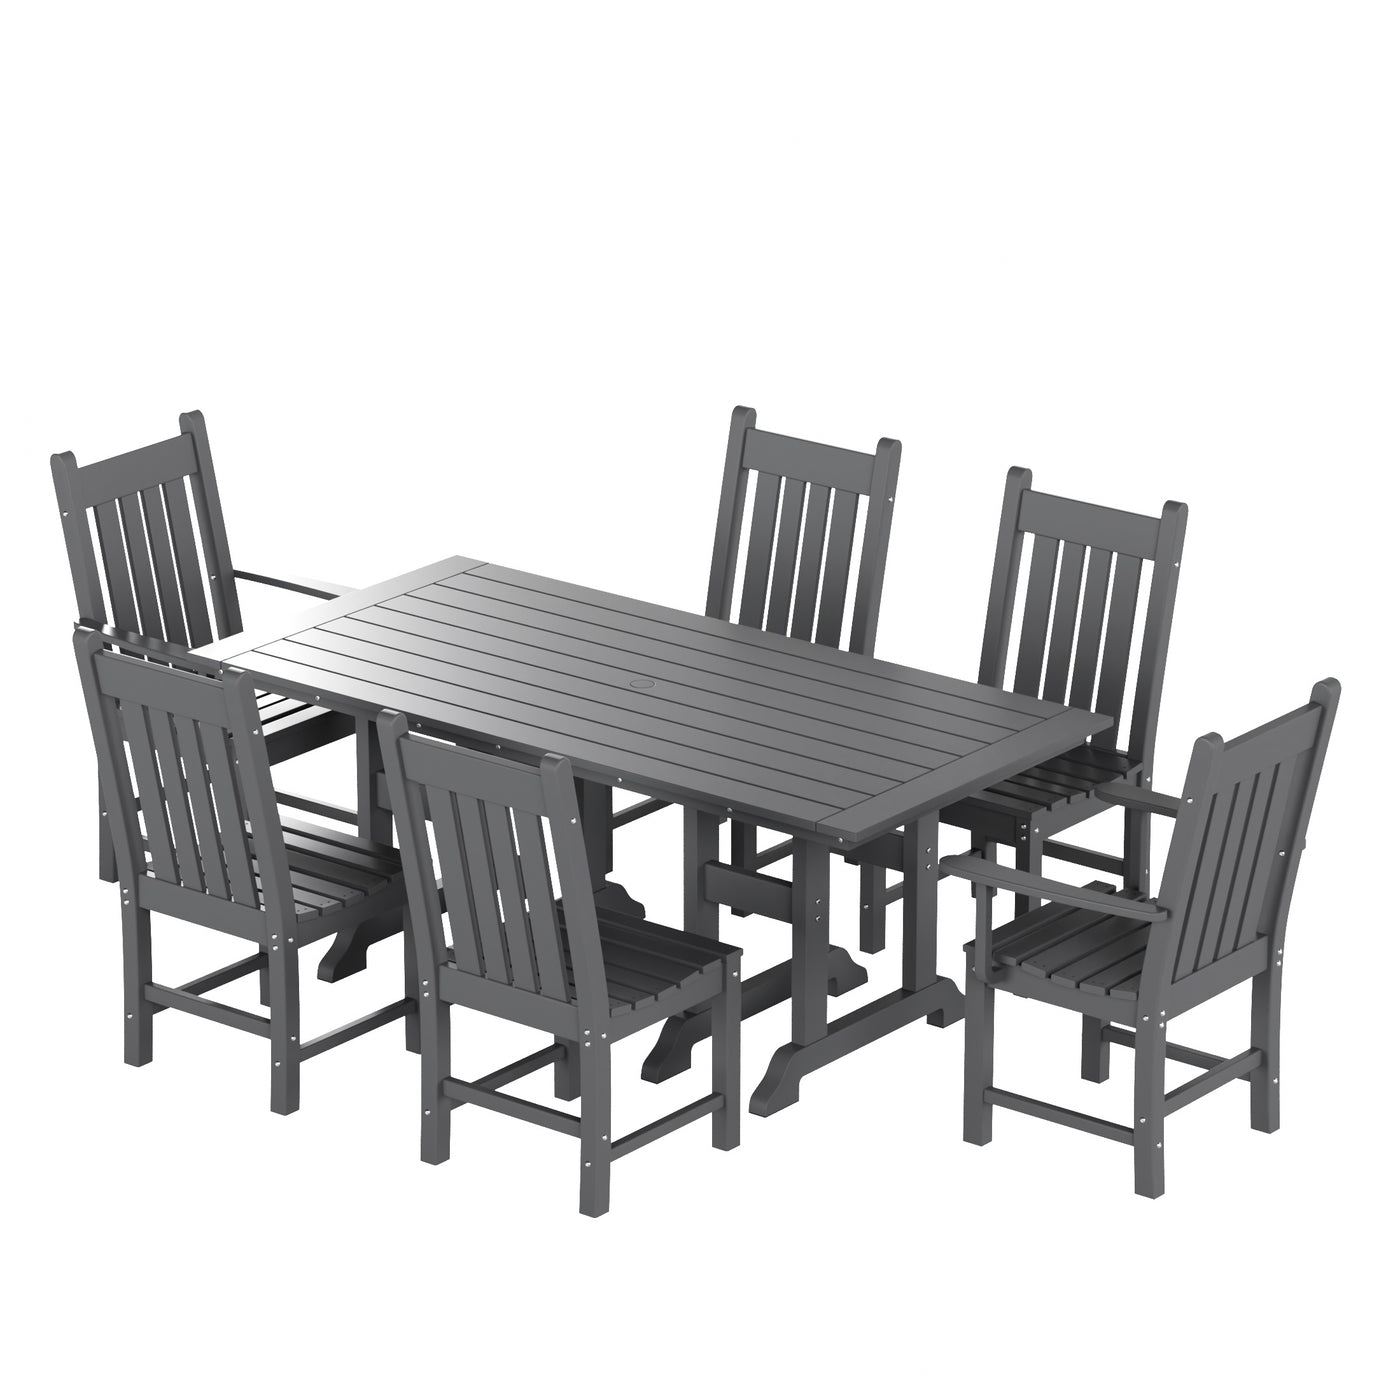 Malibu 7 Piece Outdoor Patio Dining Set Outdoor Dining Table with Dining Chair